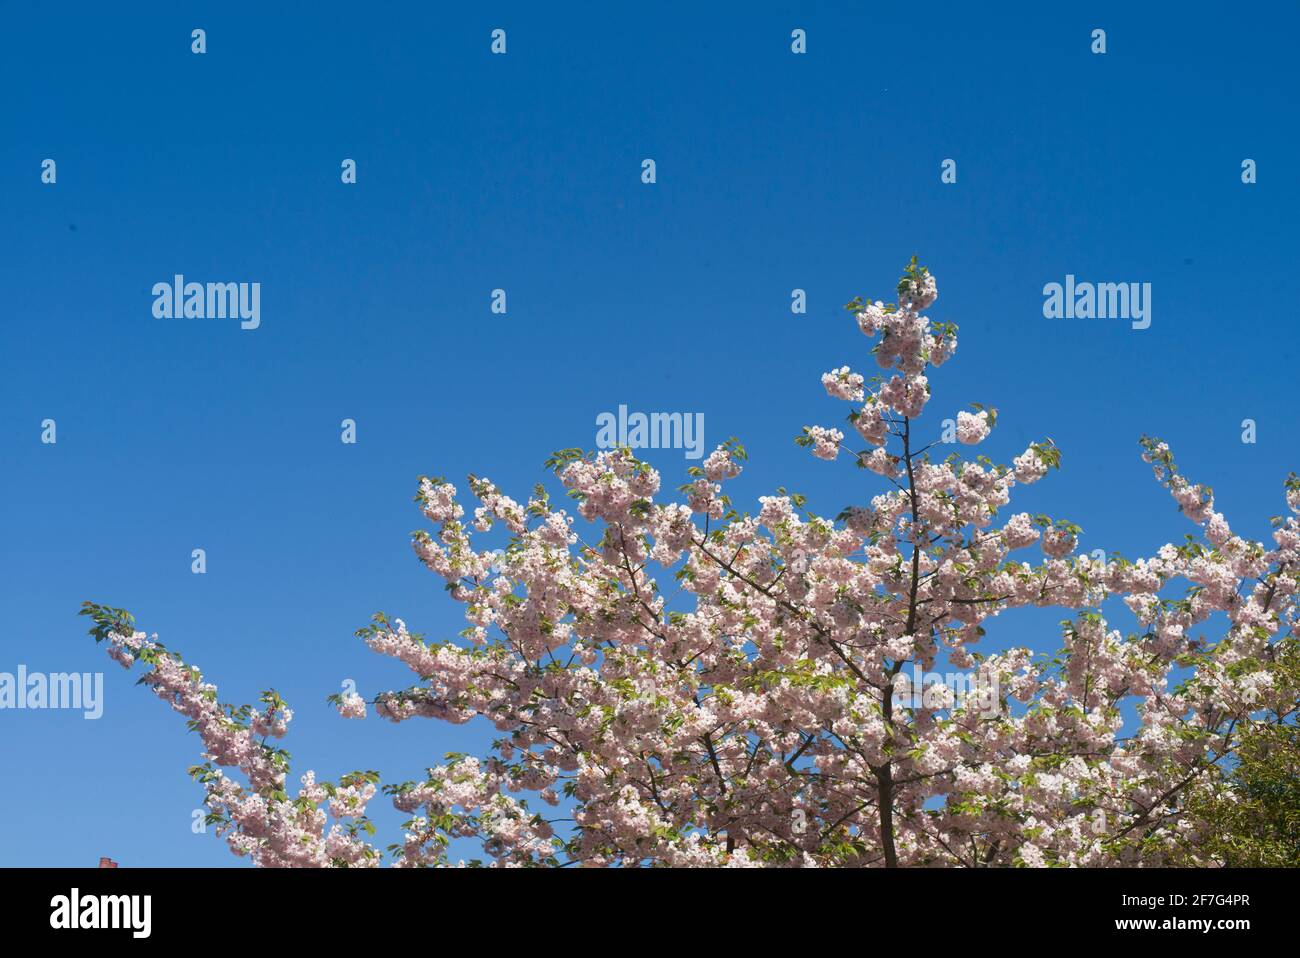 Cherry blossoms with clear blue sky Stock Photo